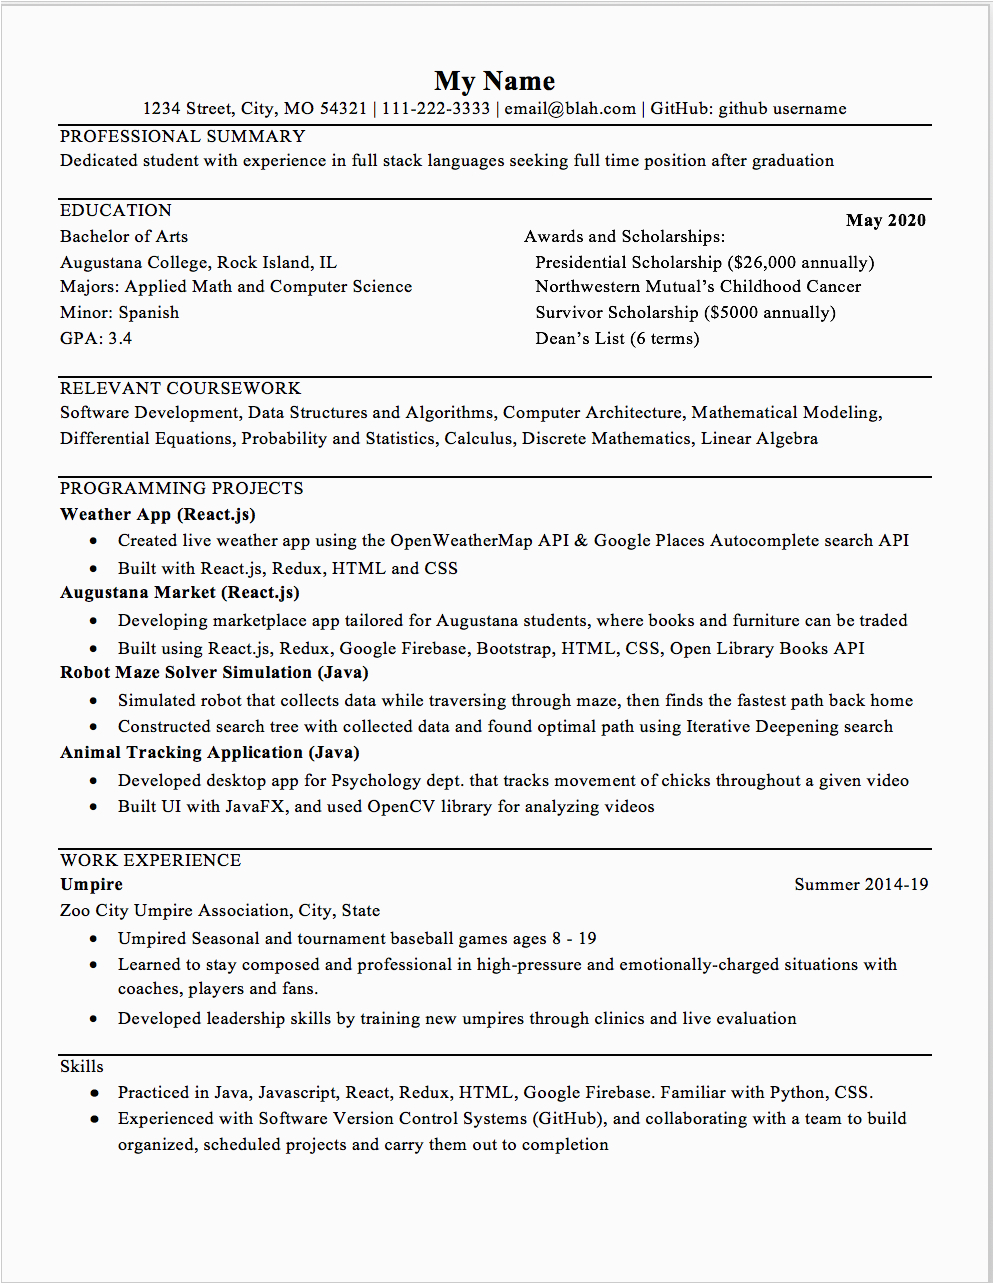 Sample Resume for Computer Science Fresh Graduate Reddit Up Ing Puter Science Graduate Resumes